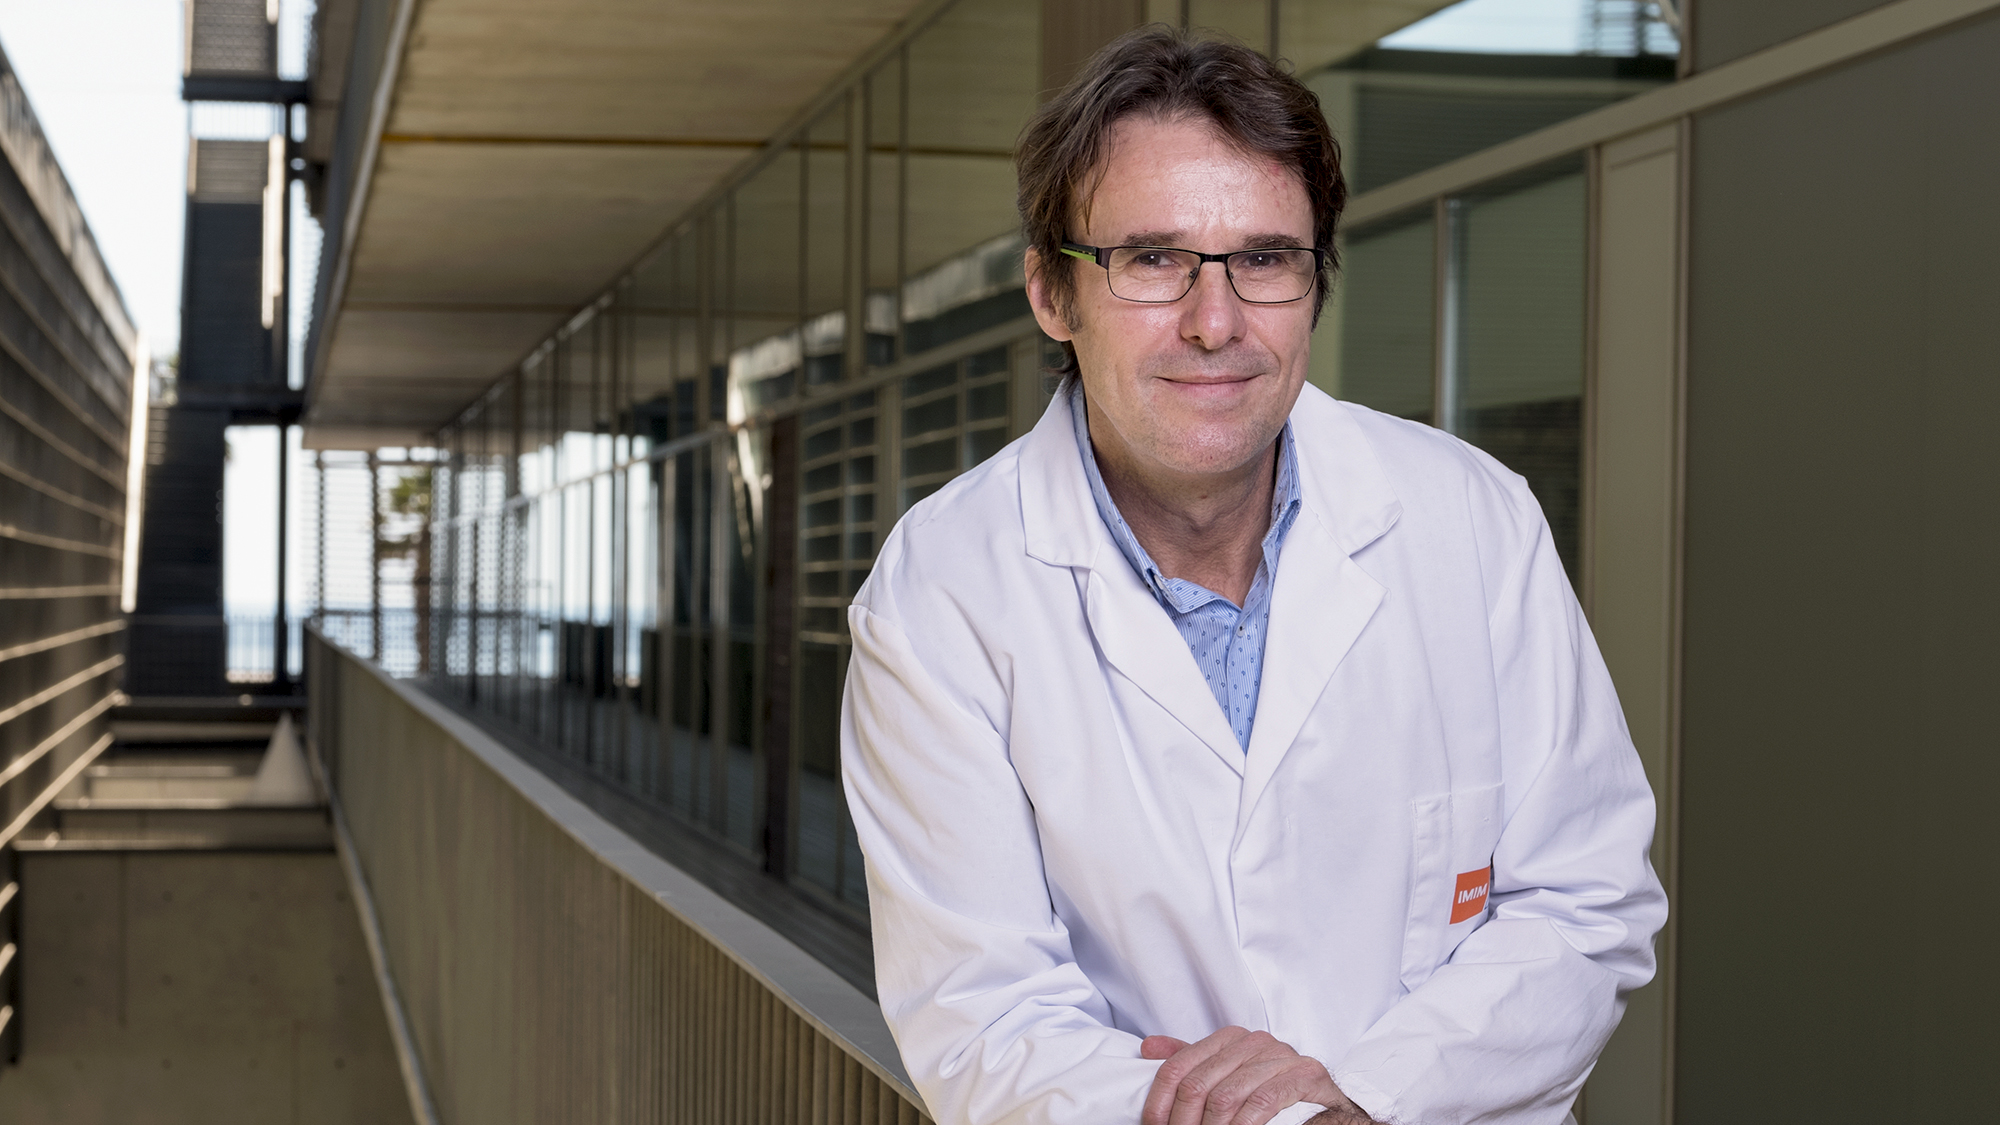 Joaquín Arribas became the new IMIM director in March 2020 - just in the midst of the coronavirus crisis.